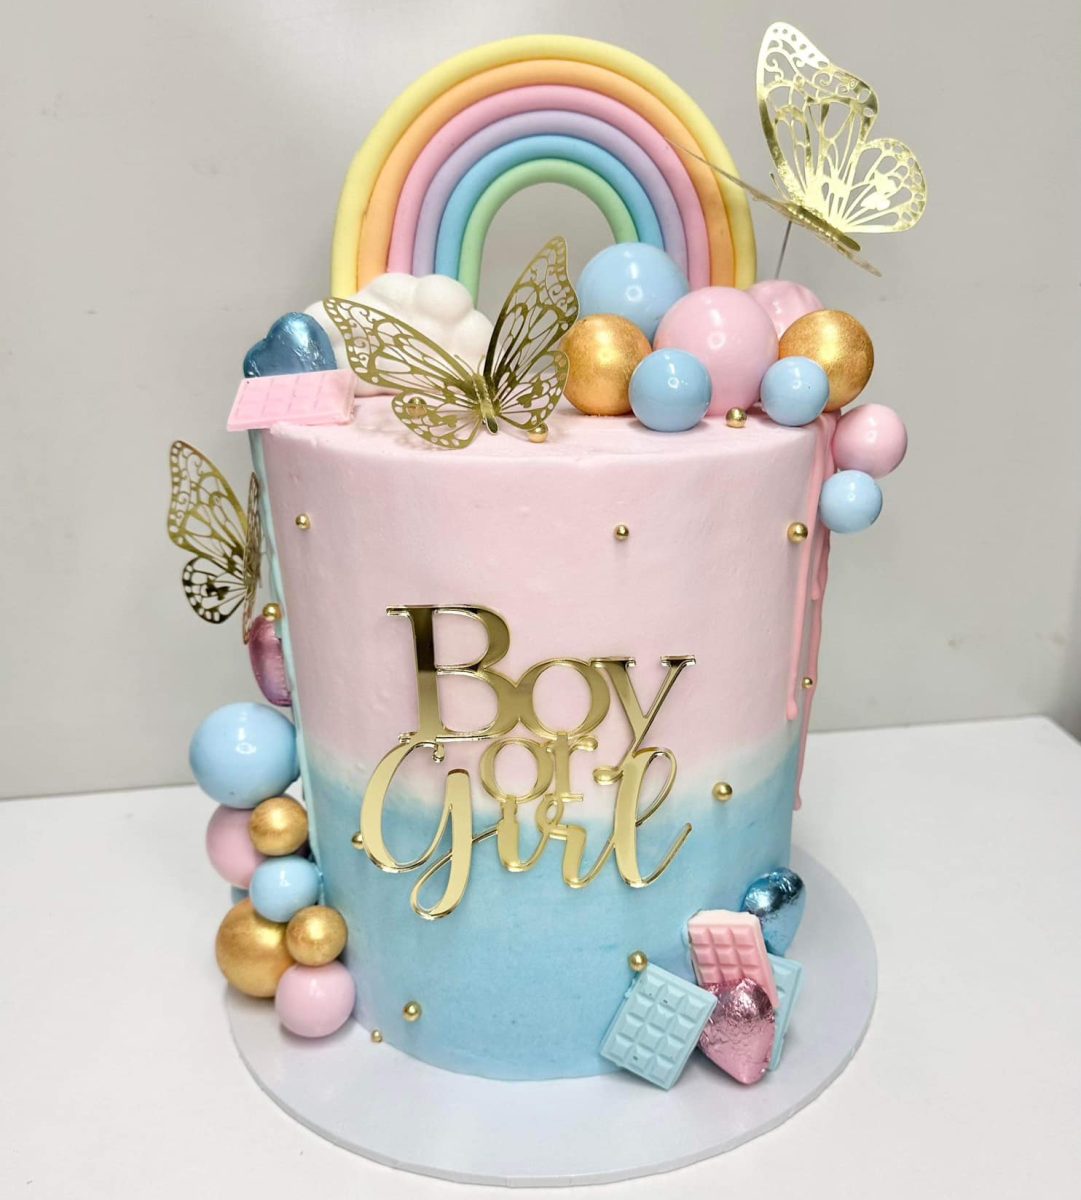 Pink and blue cake that says boy or girl, from Berkeley Cakes and Pies